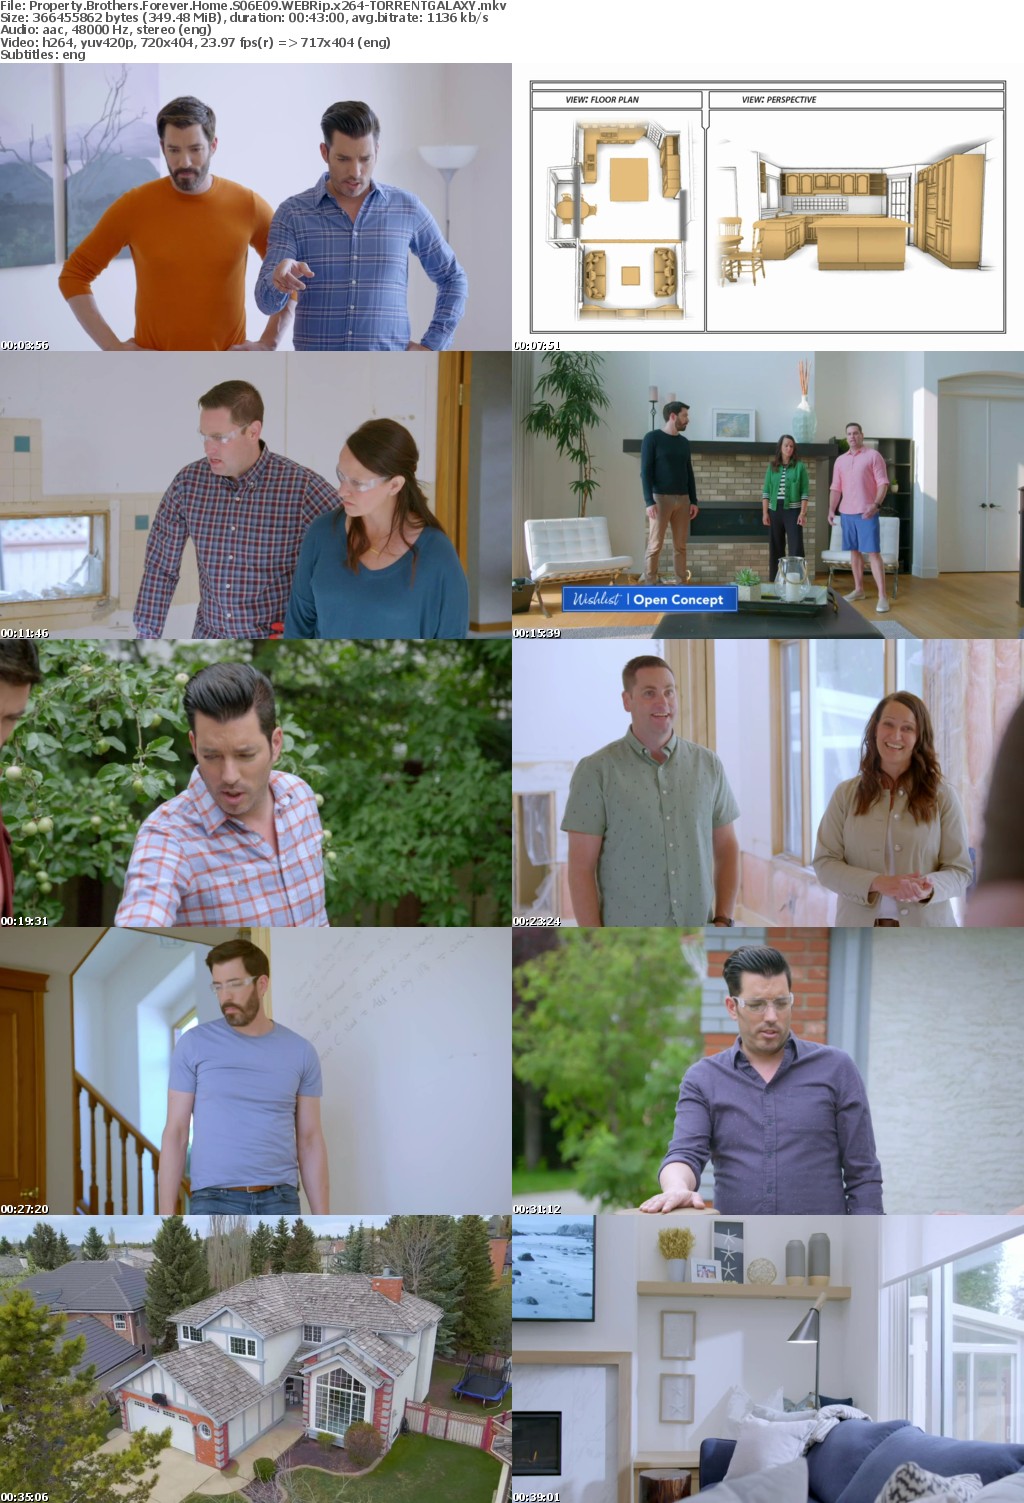 Property Brothers Forever Home S06E09 WEBRip x264-GALAXY